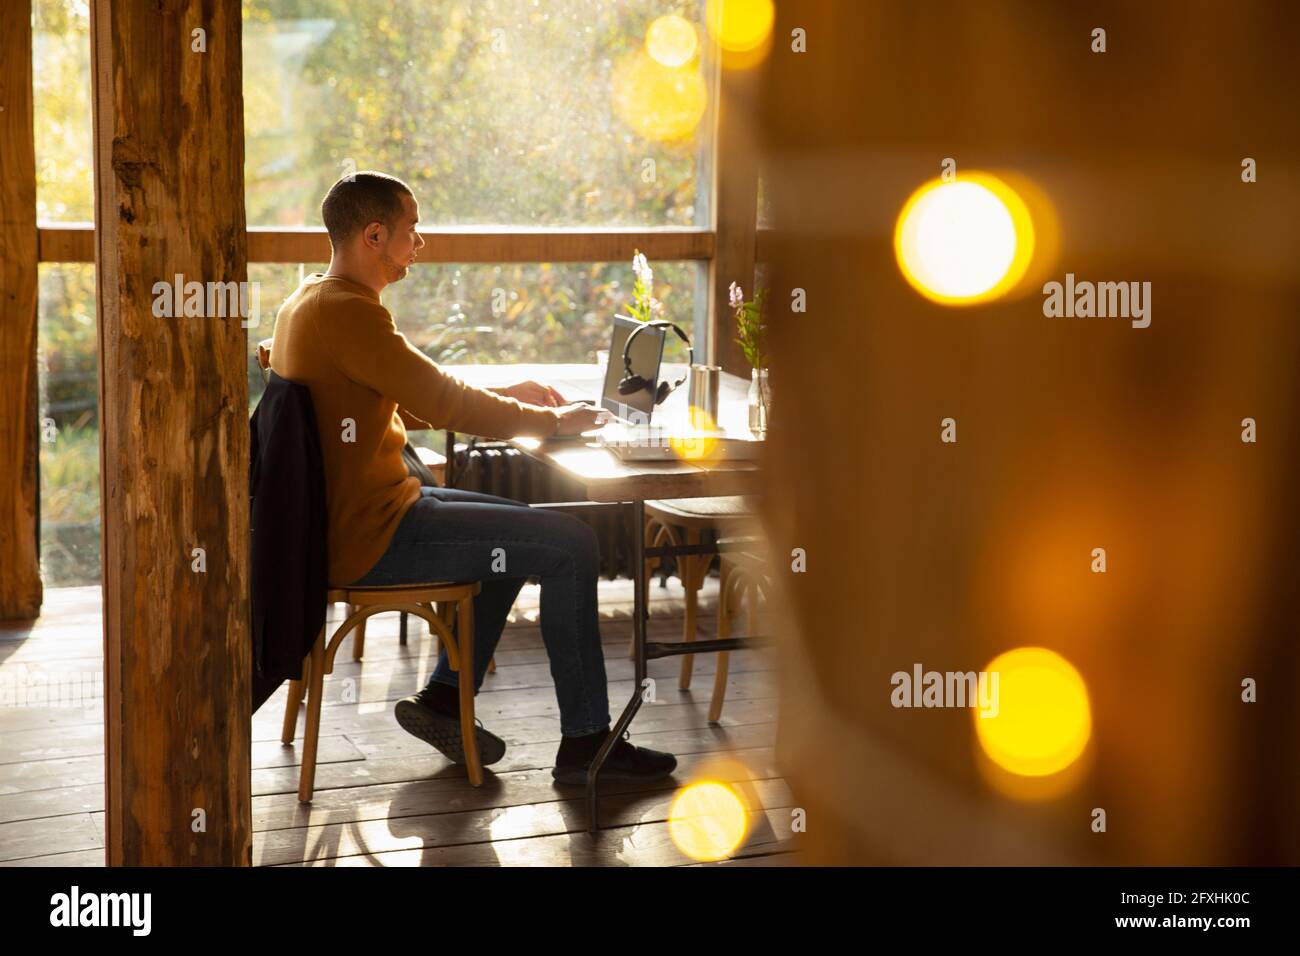 Businessman working at laptop at cafe table Stock Photo